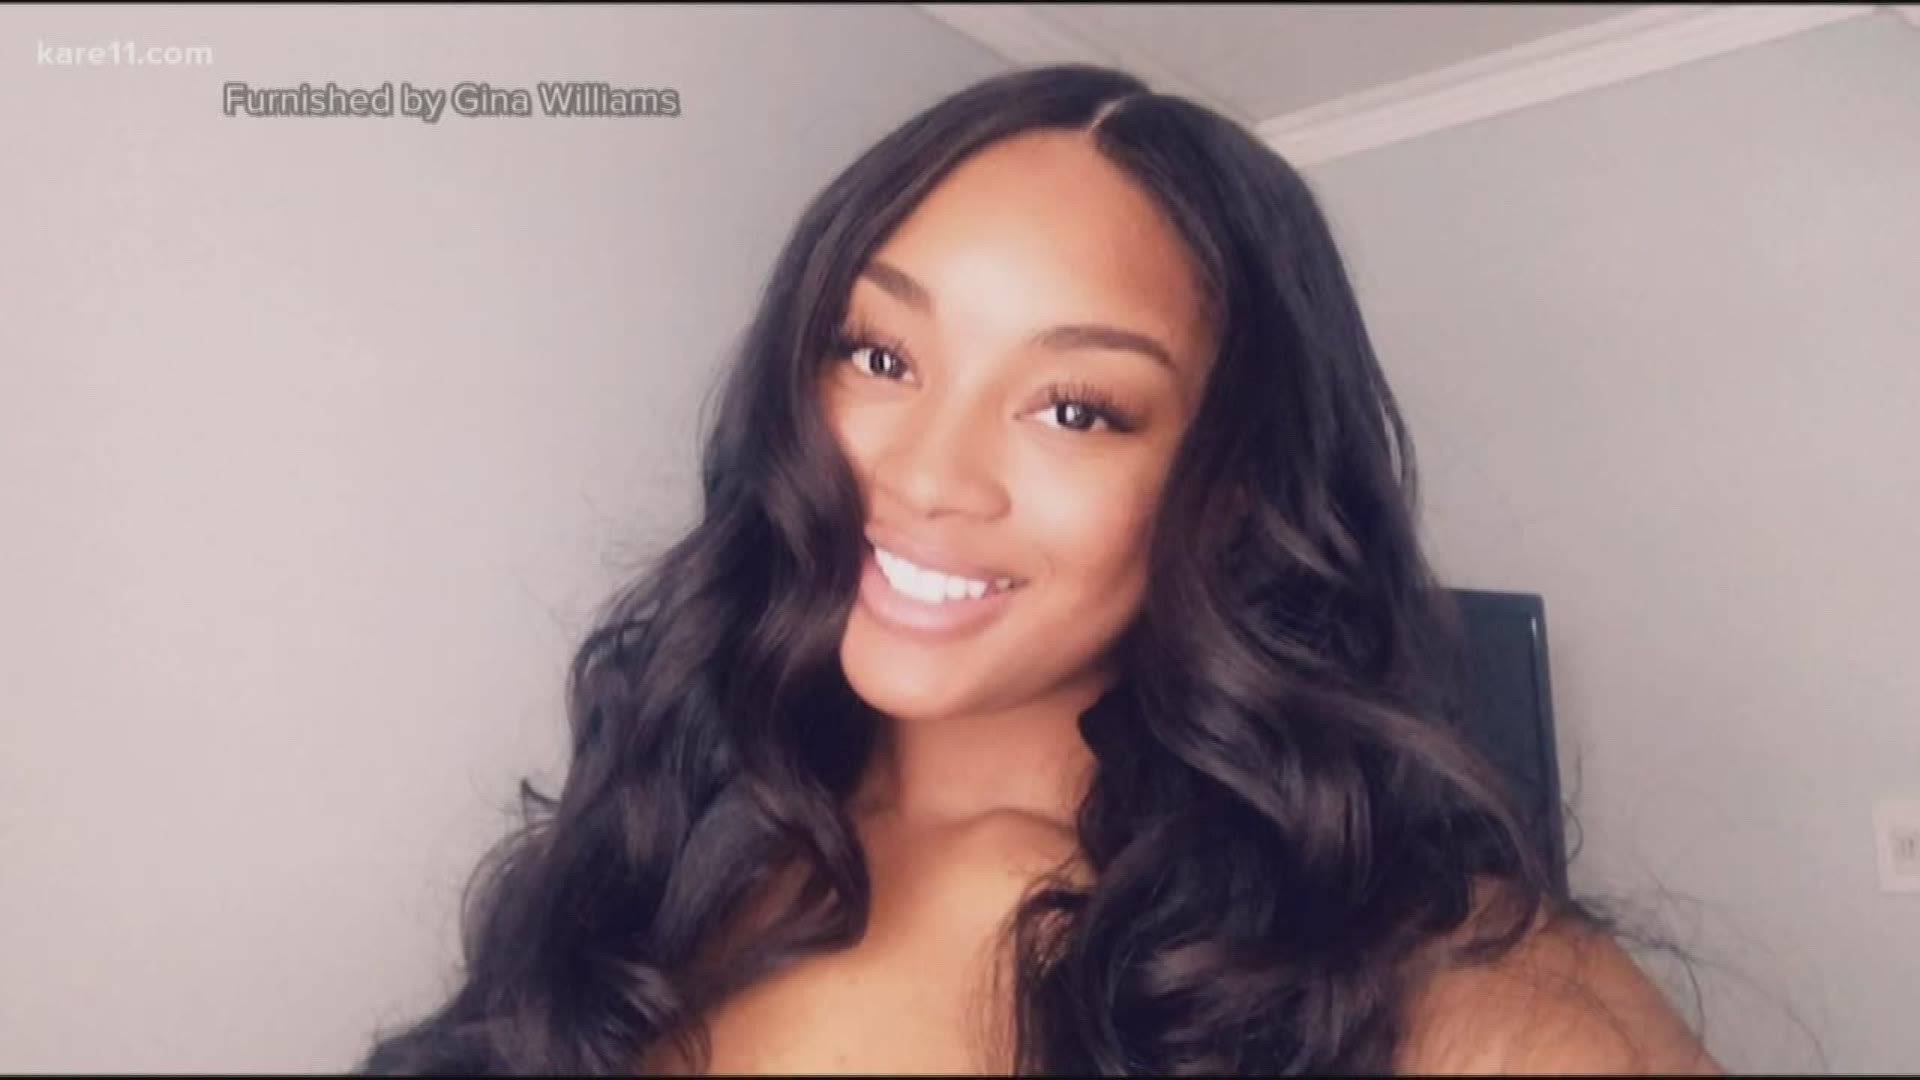 Loved ones gathered at Shiloh Temple in Minneapolis Saturday to say goodbye to Monique Baugh, a 28-year-old mother of two and realtor killed on New Year's Eve.